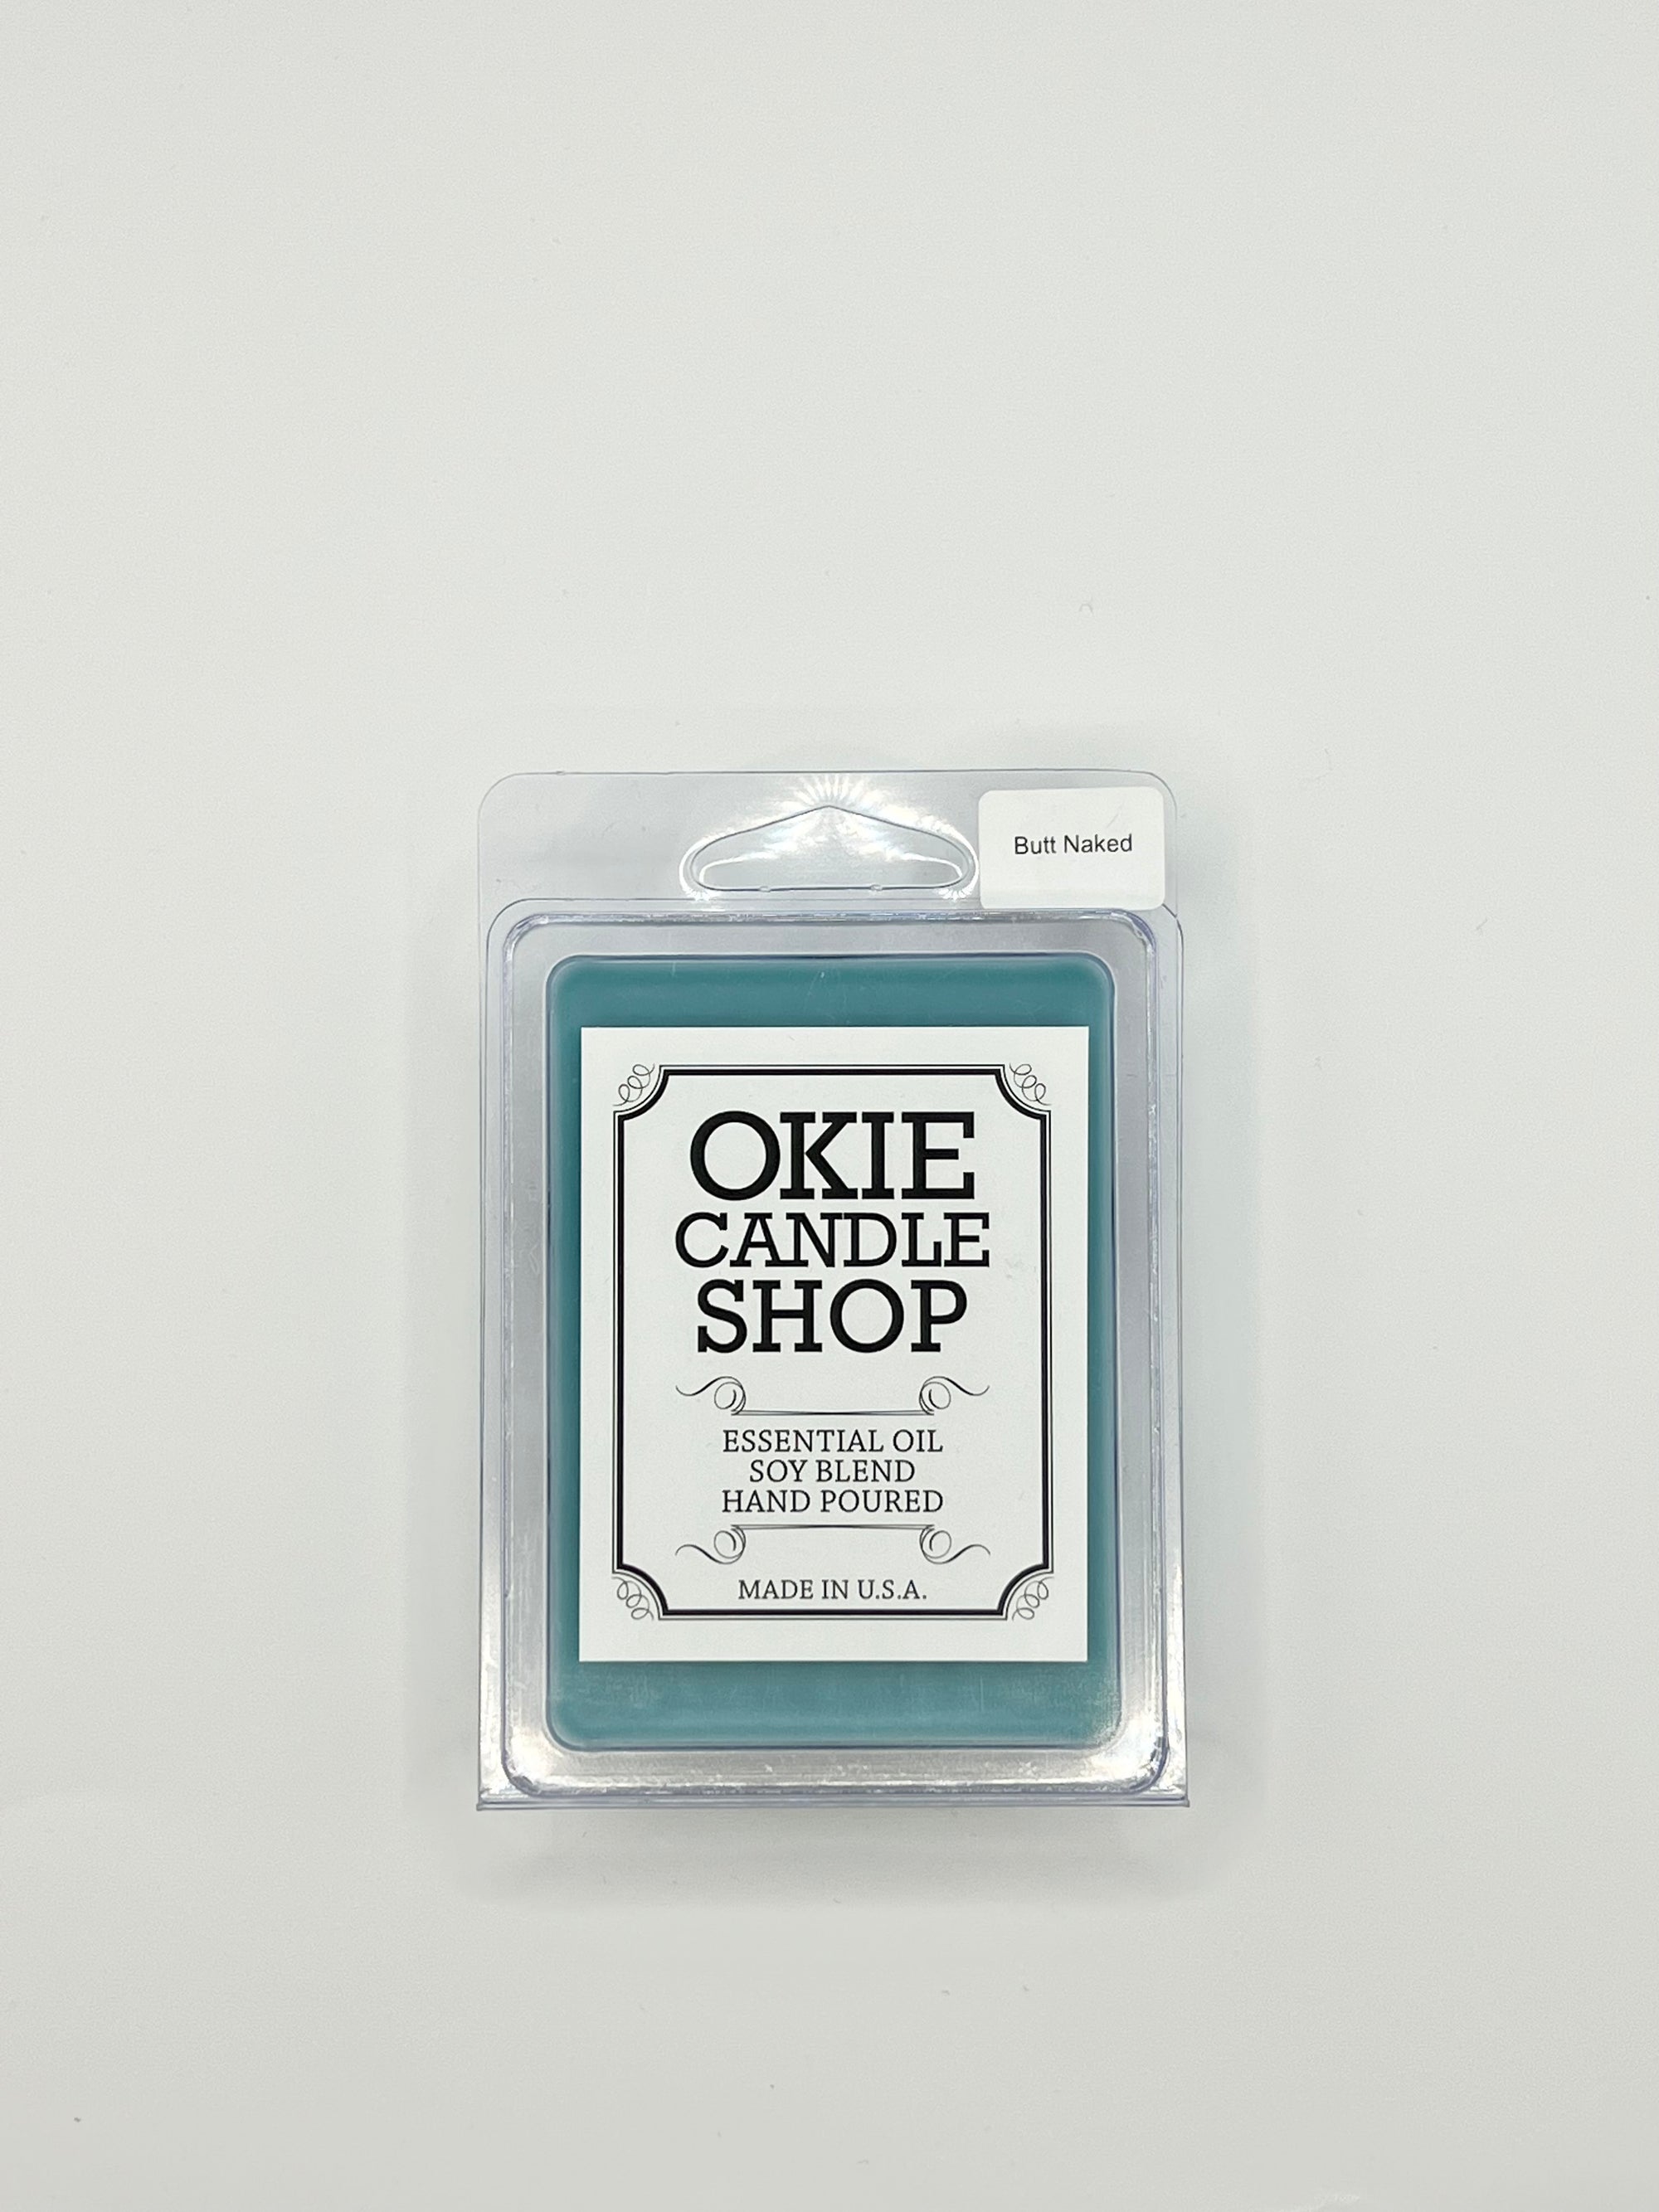 Okie Candle Butt Naked - Wax Melts